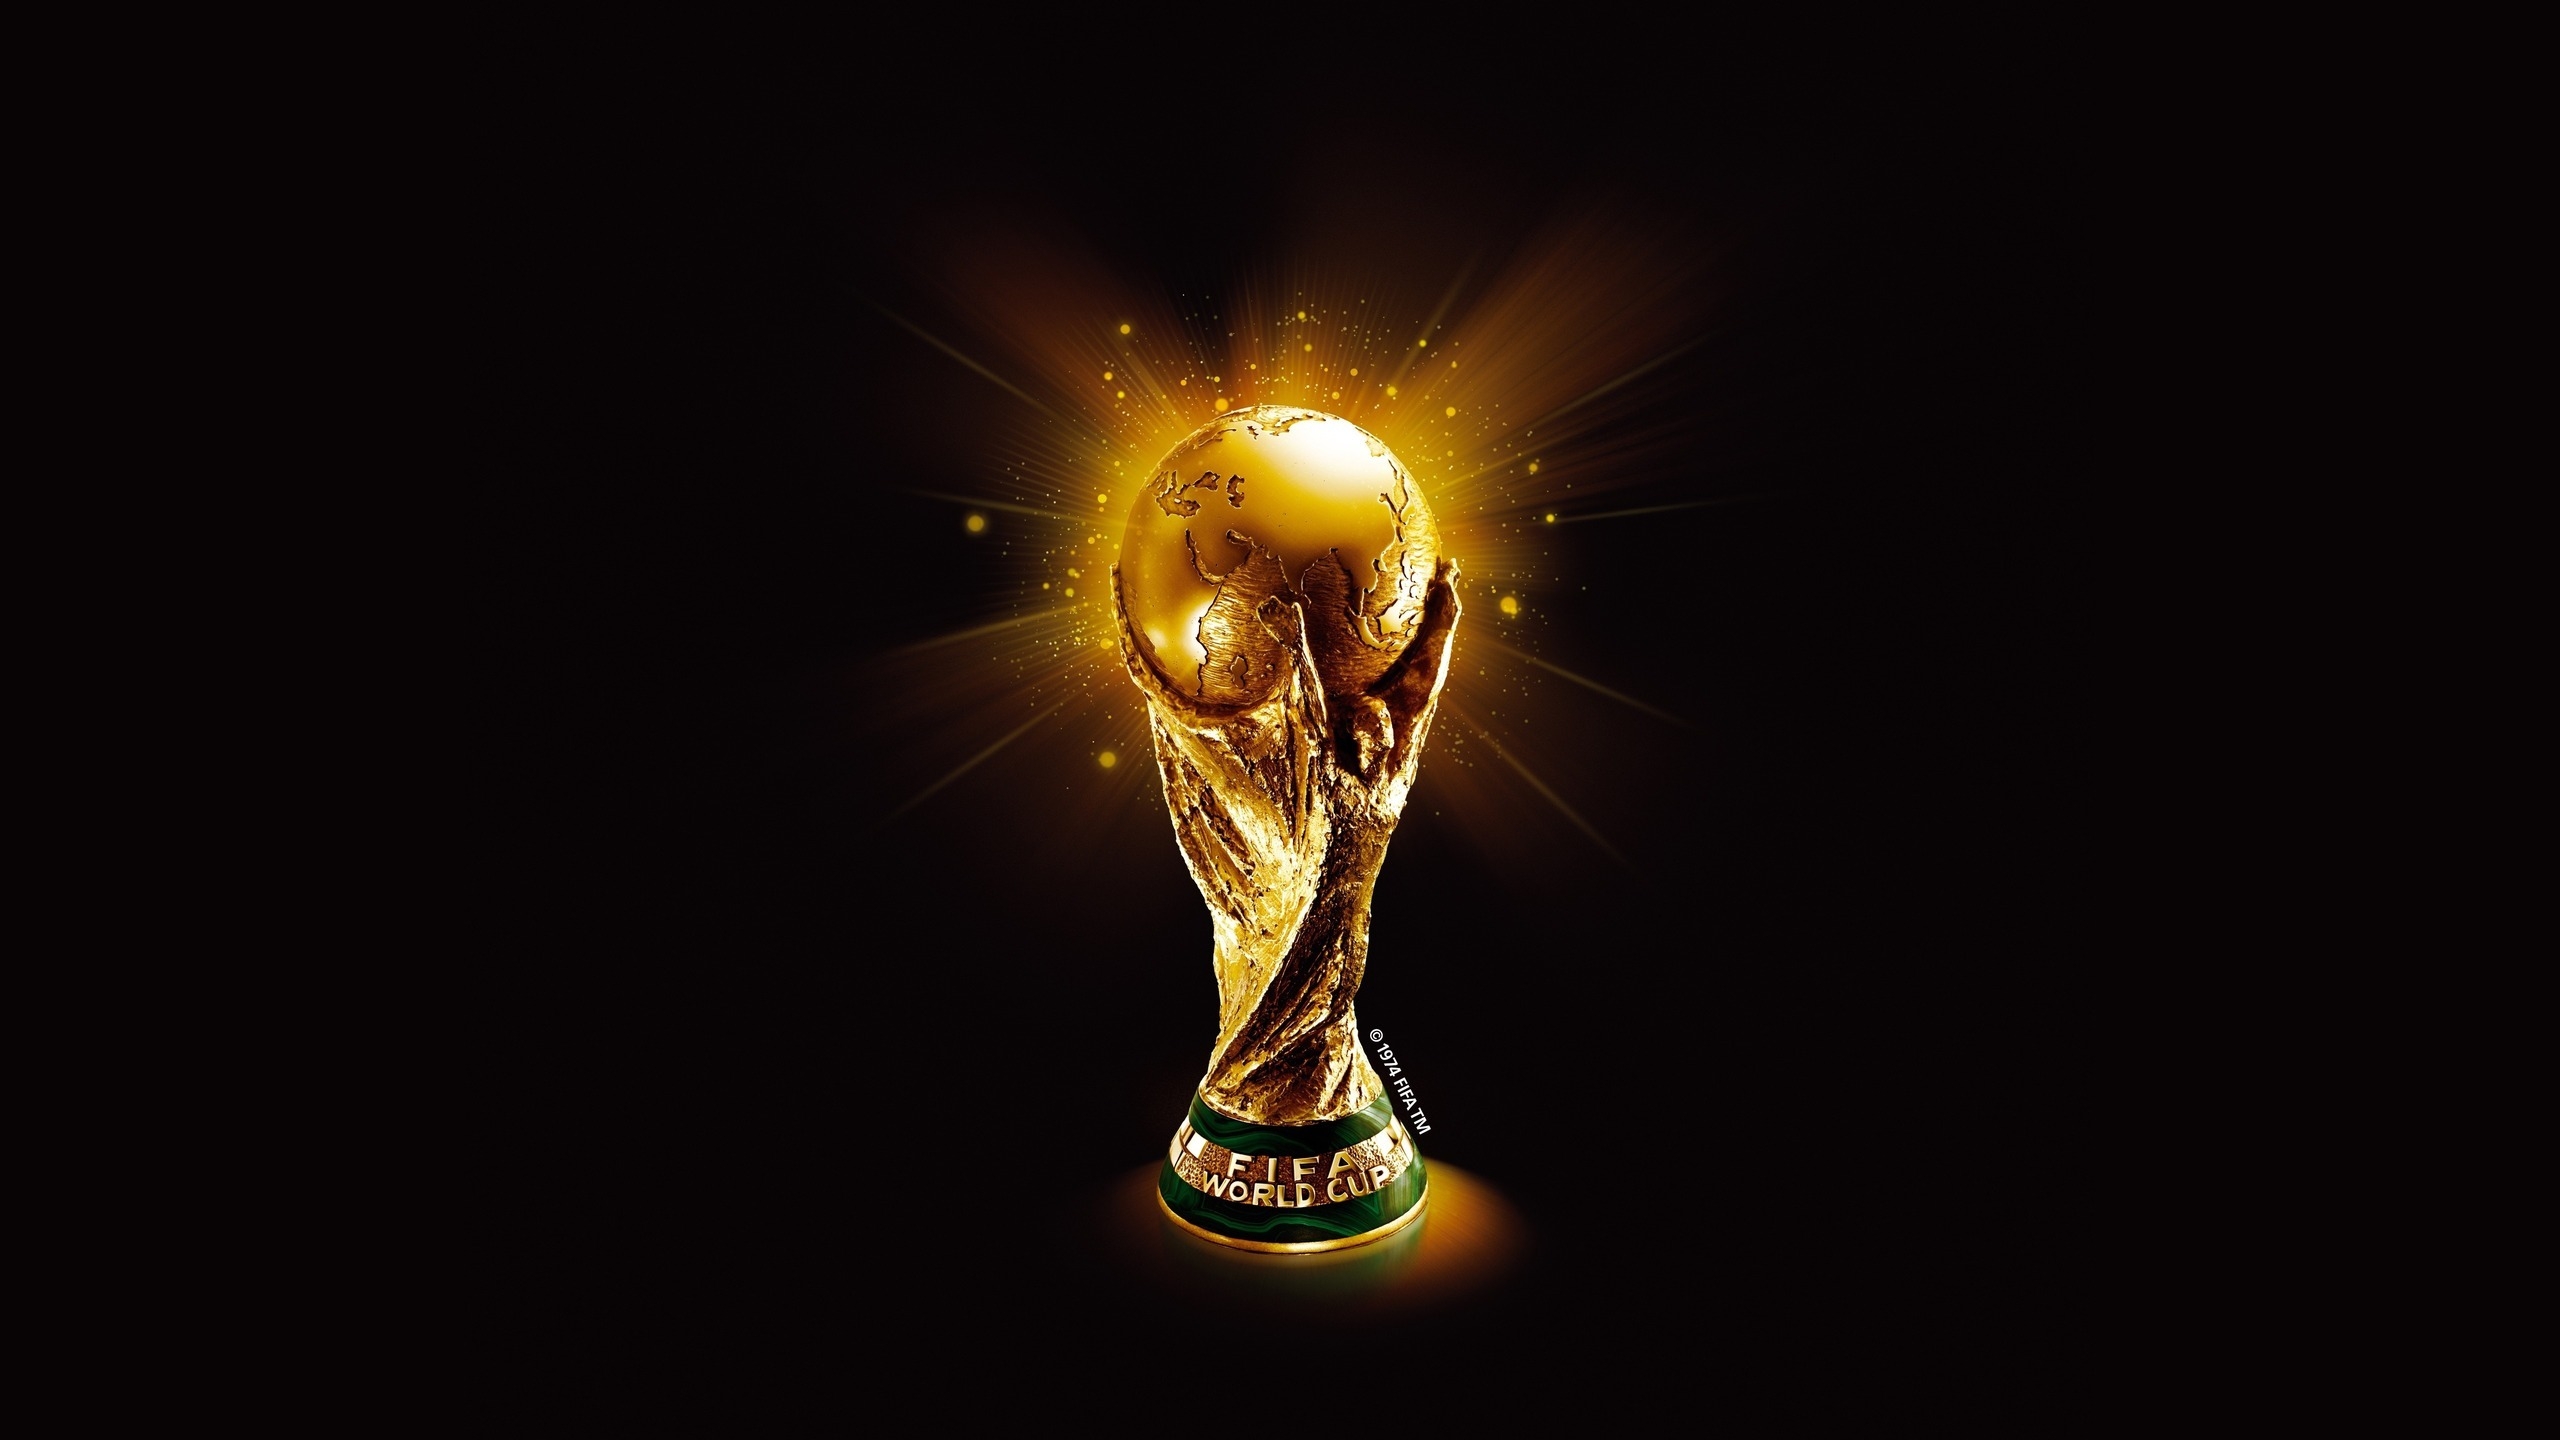 FIFA World Cup for 2560x1440 HDTV resolution